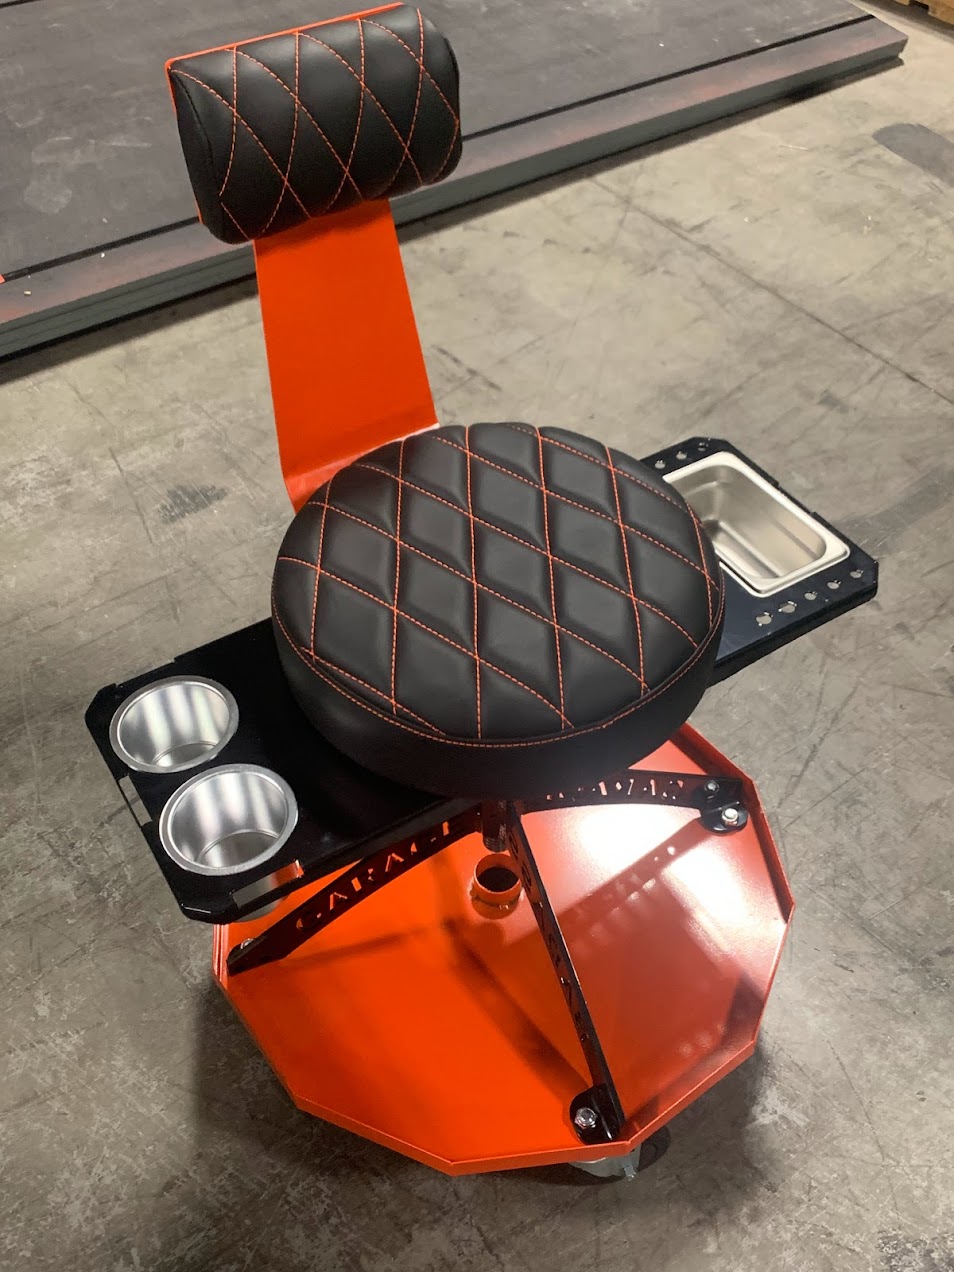 https://badass-workbench.com/wp-content/uploads/2021/05/Garage-Stool-orange-with-cup-holder-and-solid-tray-2.jpg